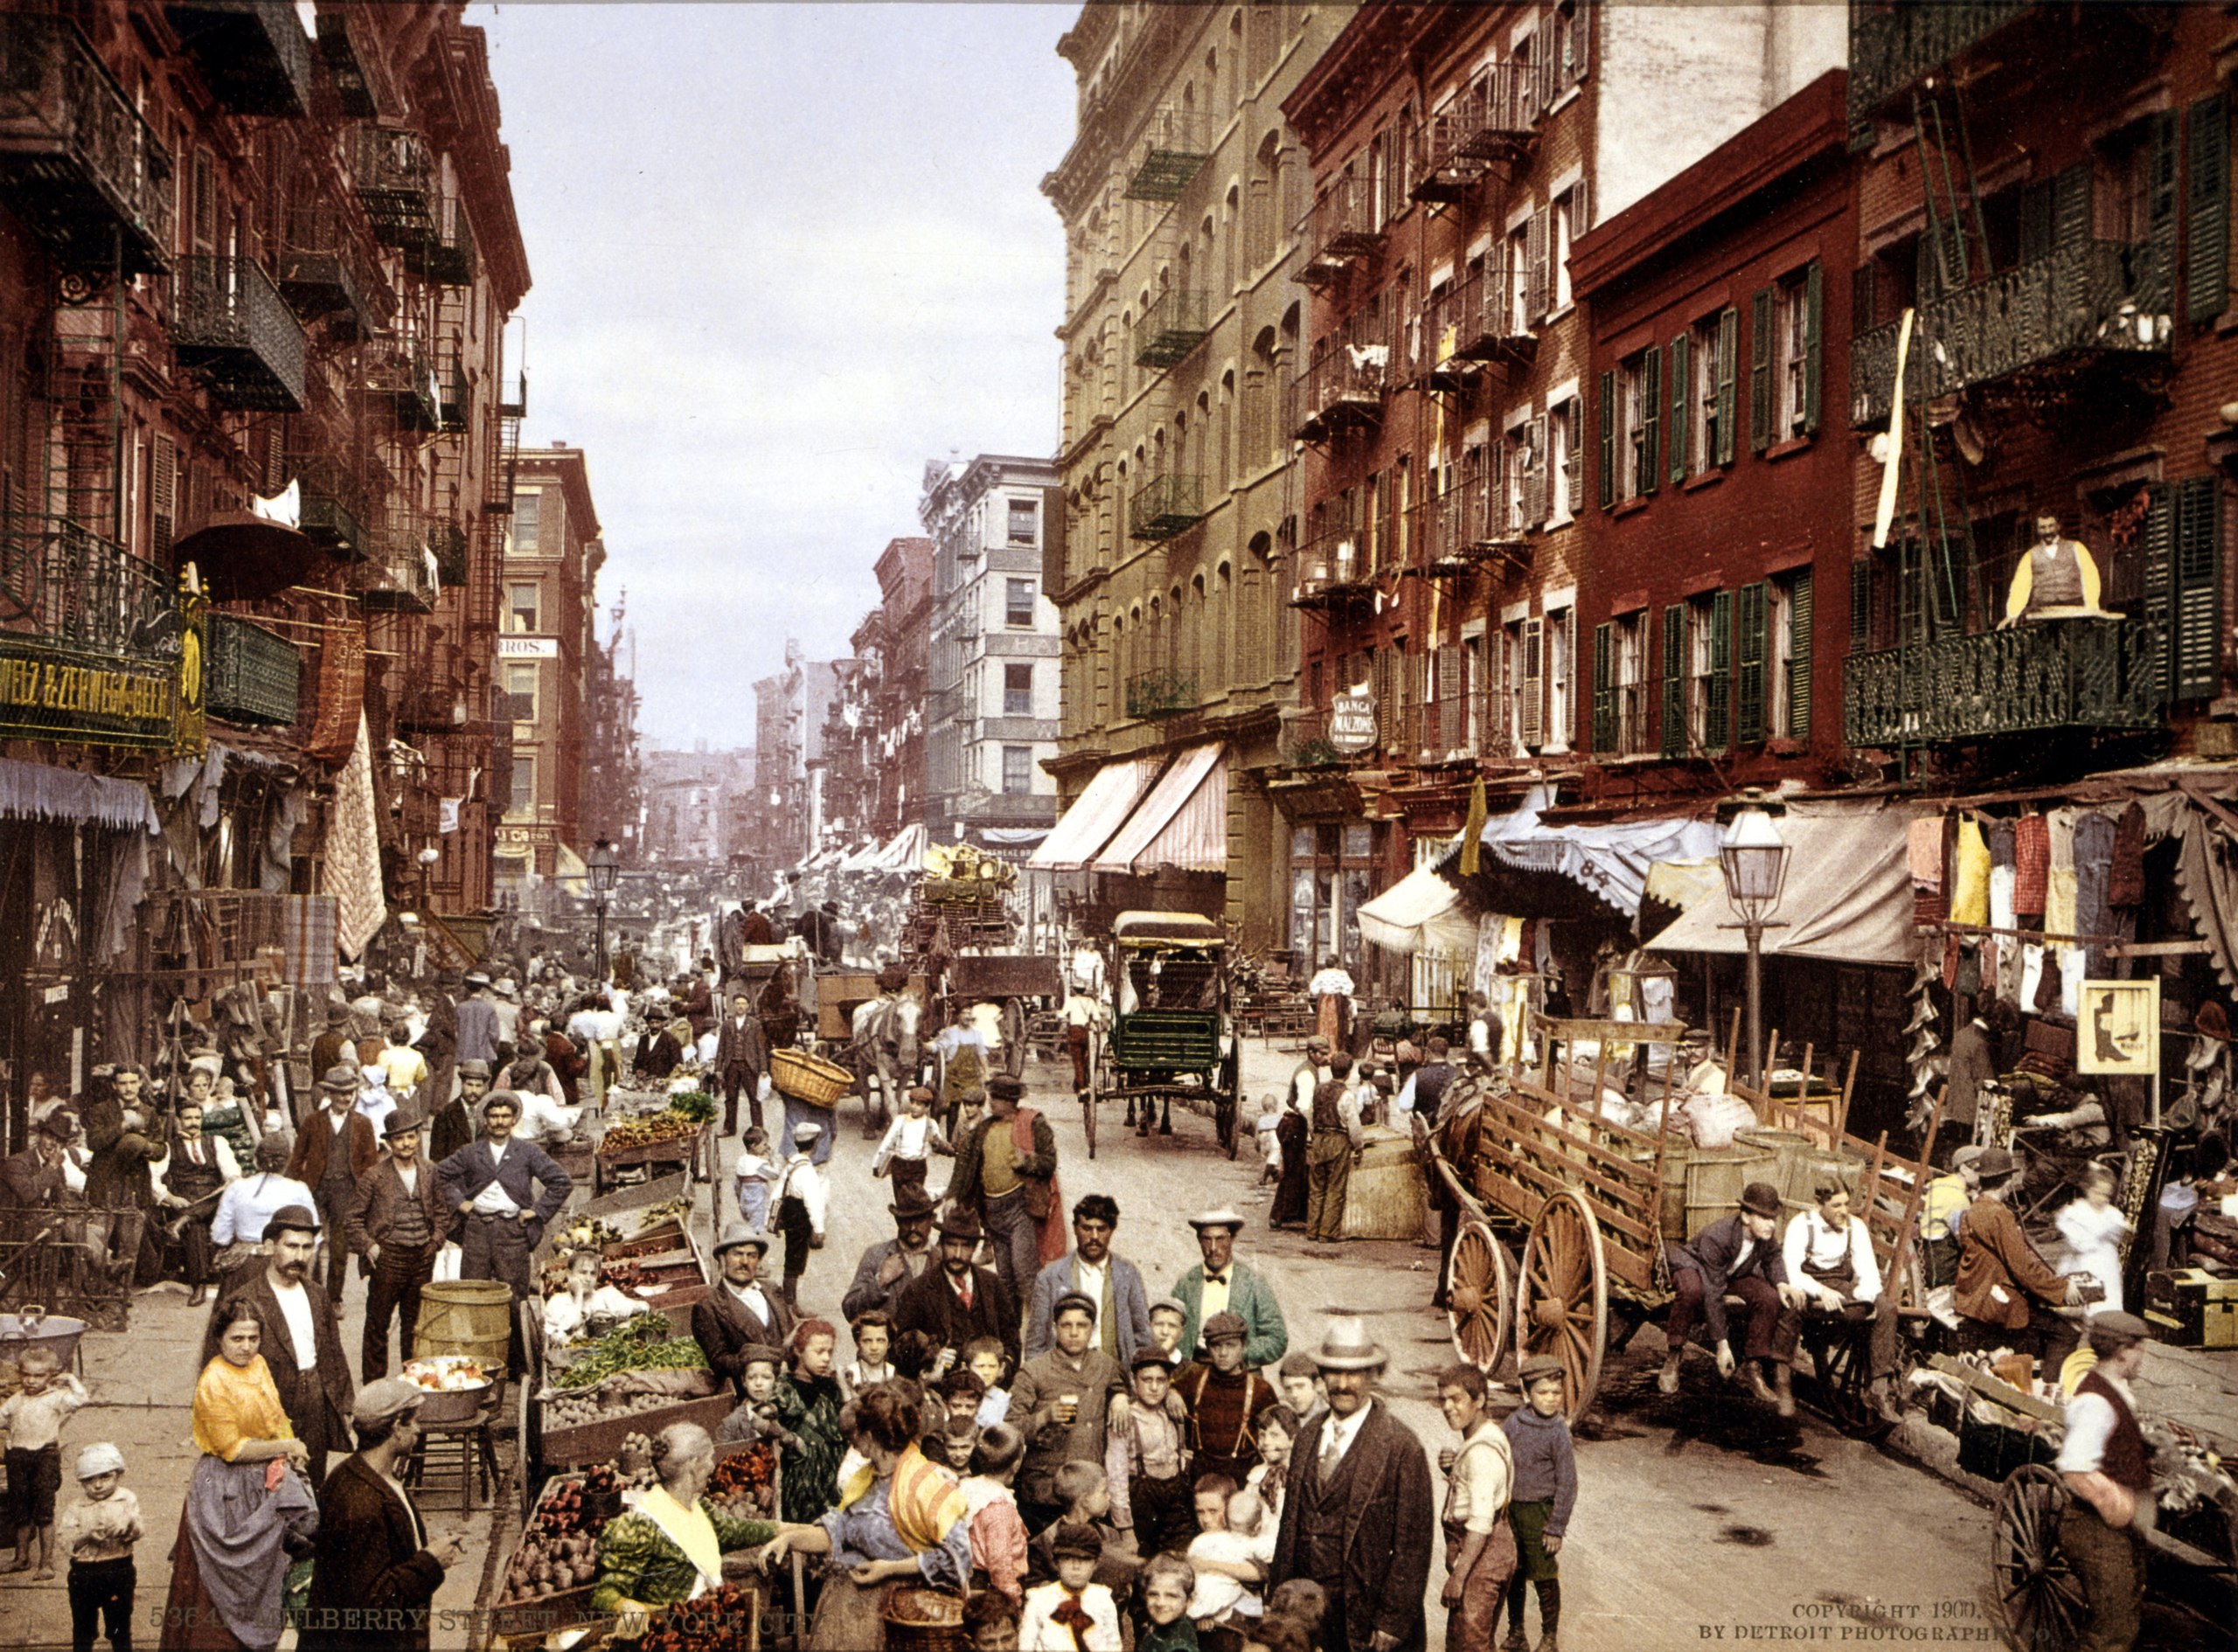 Mulberry Street, on the Lower East Side, circa 1900